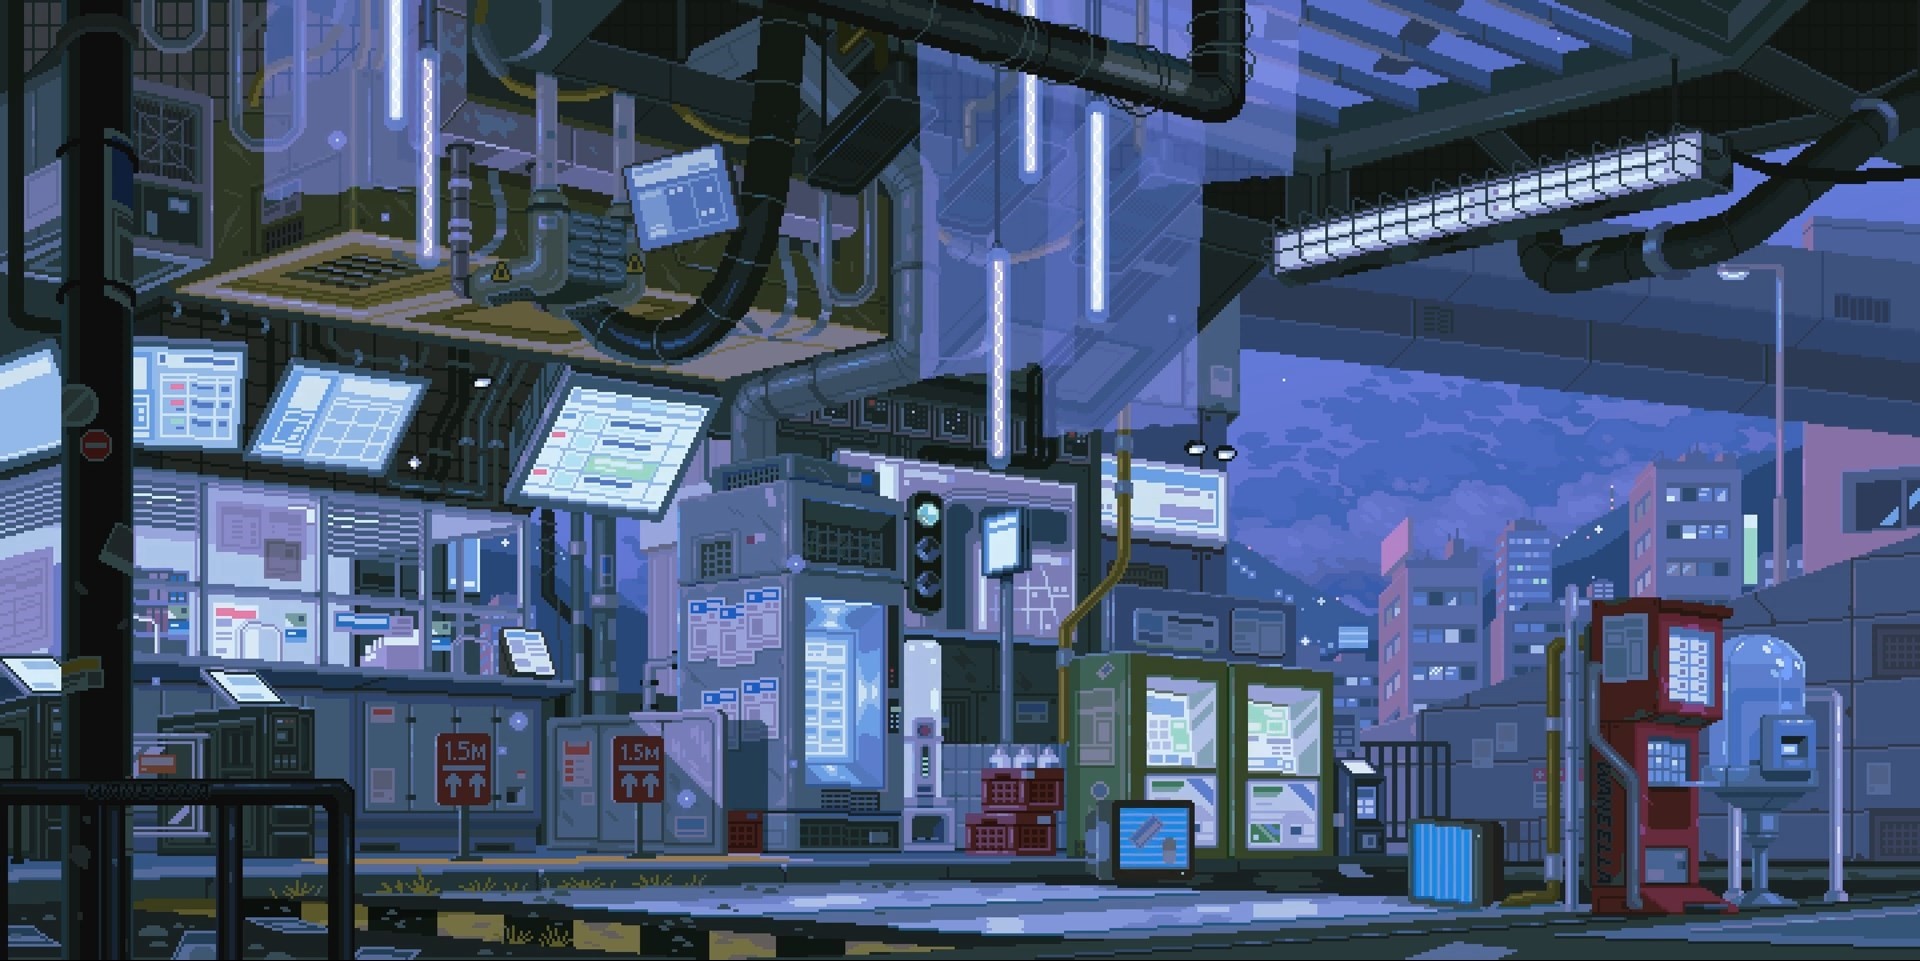 A futuristic city scene with lots of lights - Pixel art